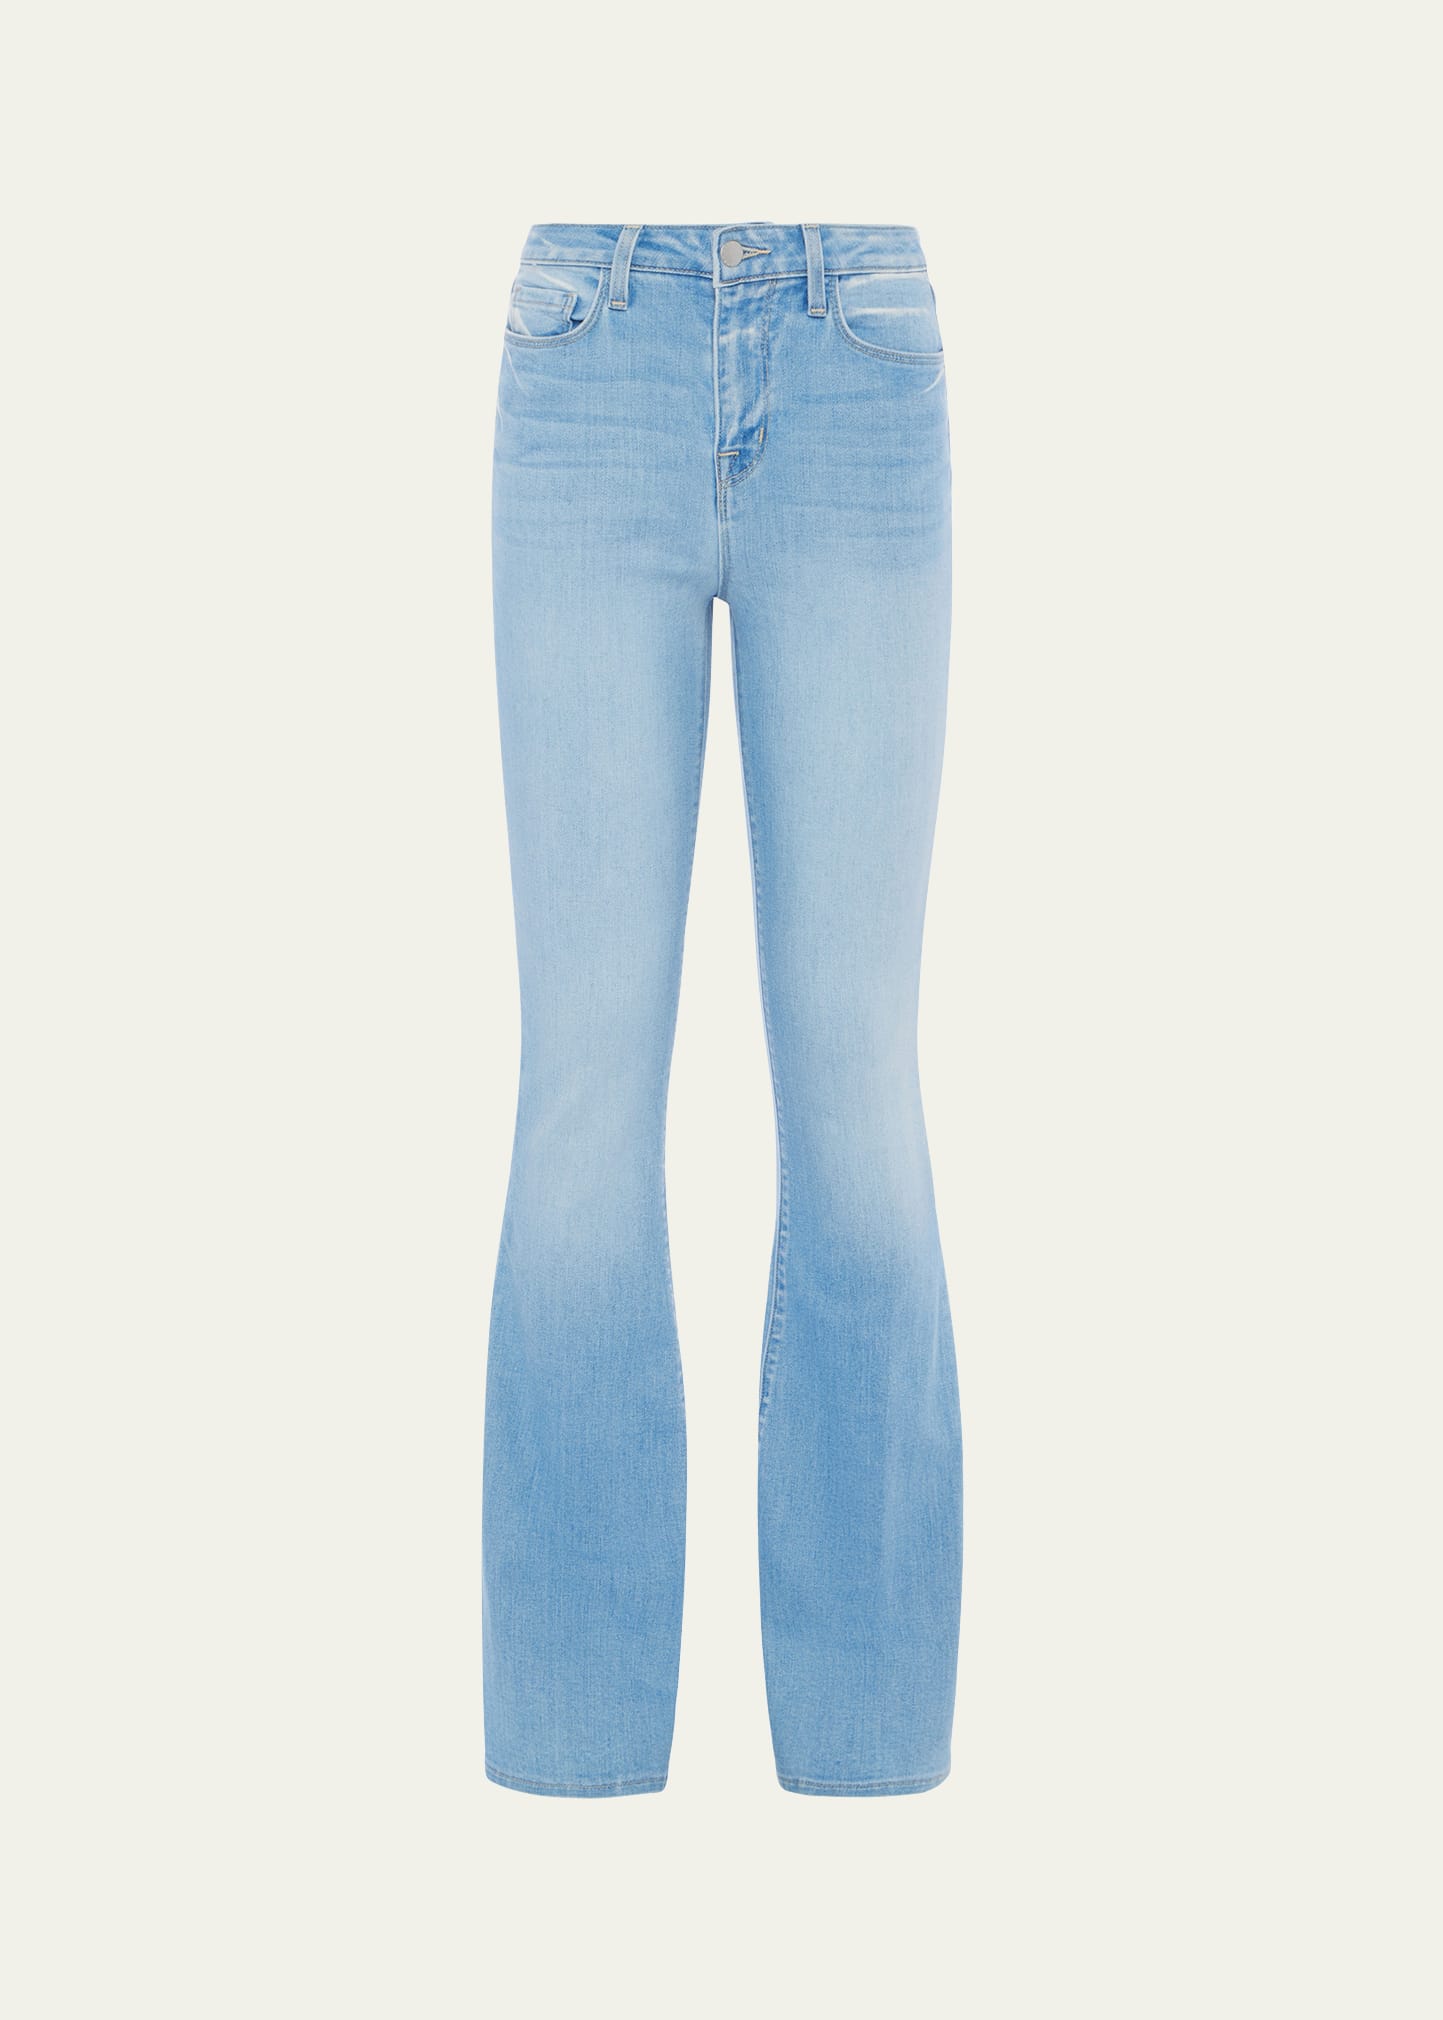 L Agence Marty High-rise Flare Jeans In Bonham